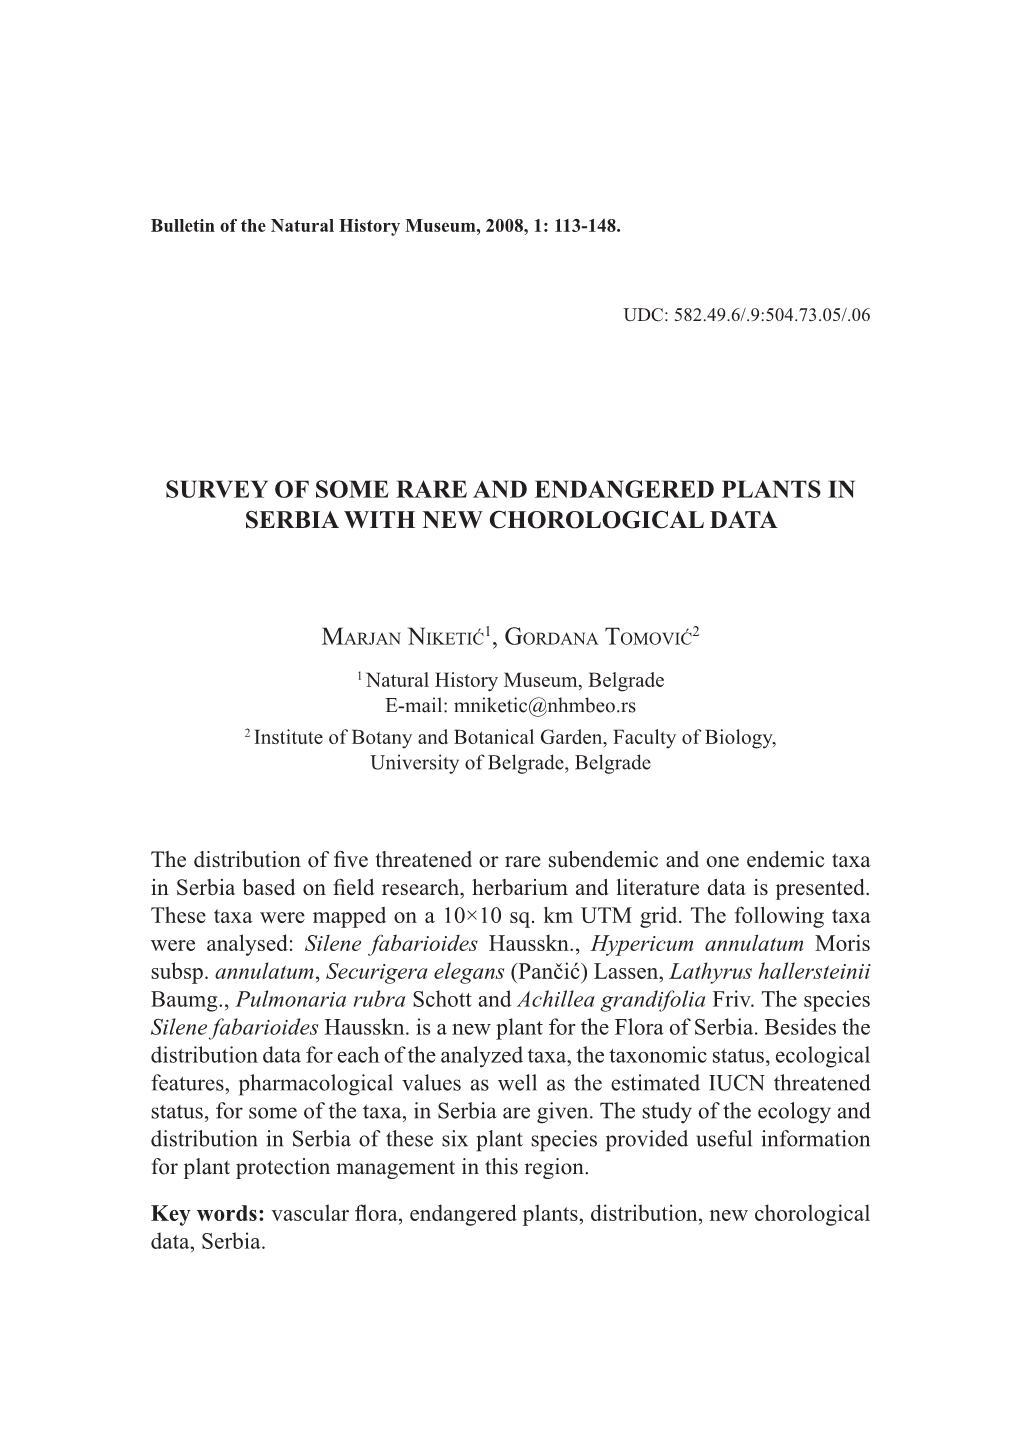 Survey of Some Rare and Endangered Plants in Serbia with New Chorological Data